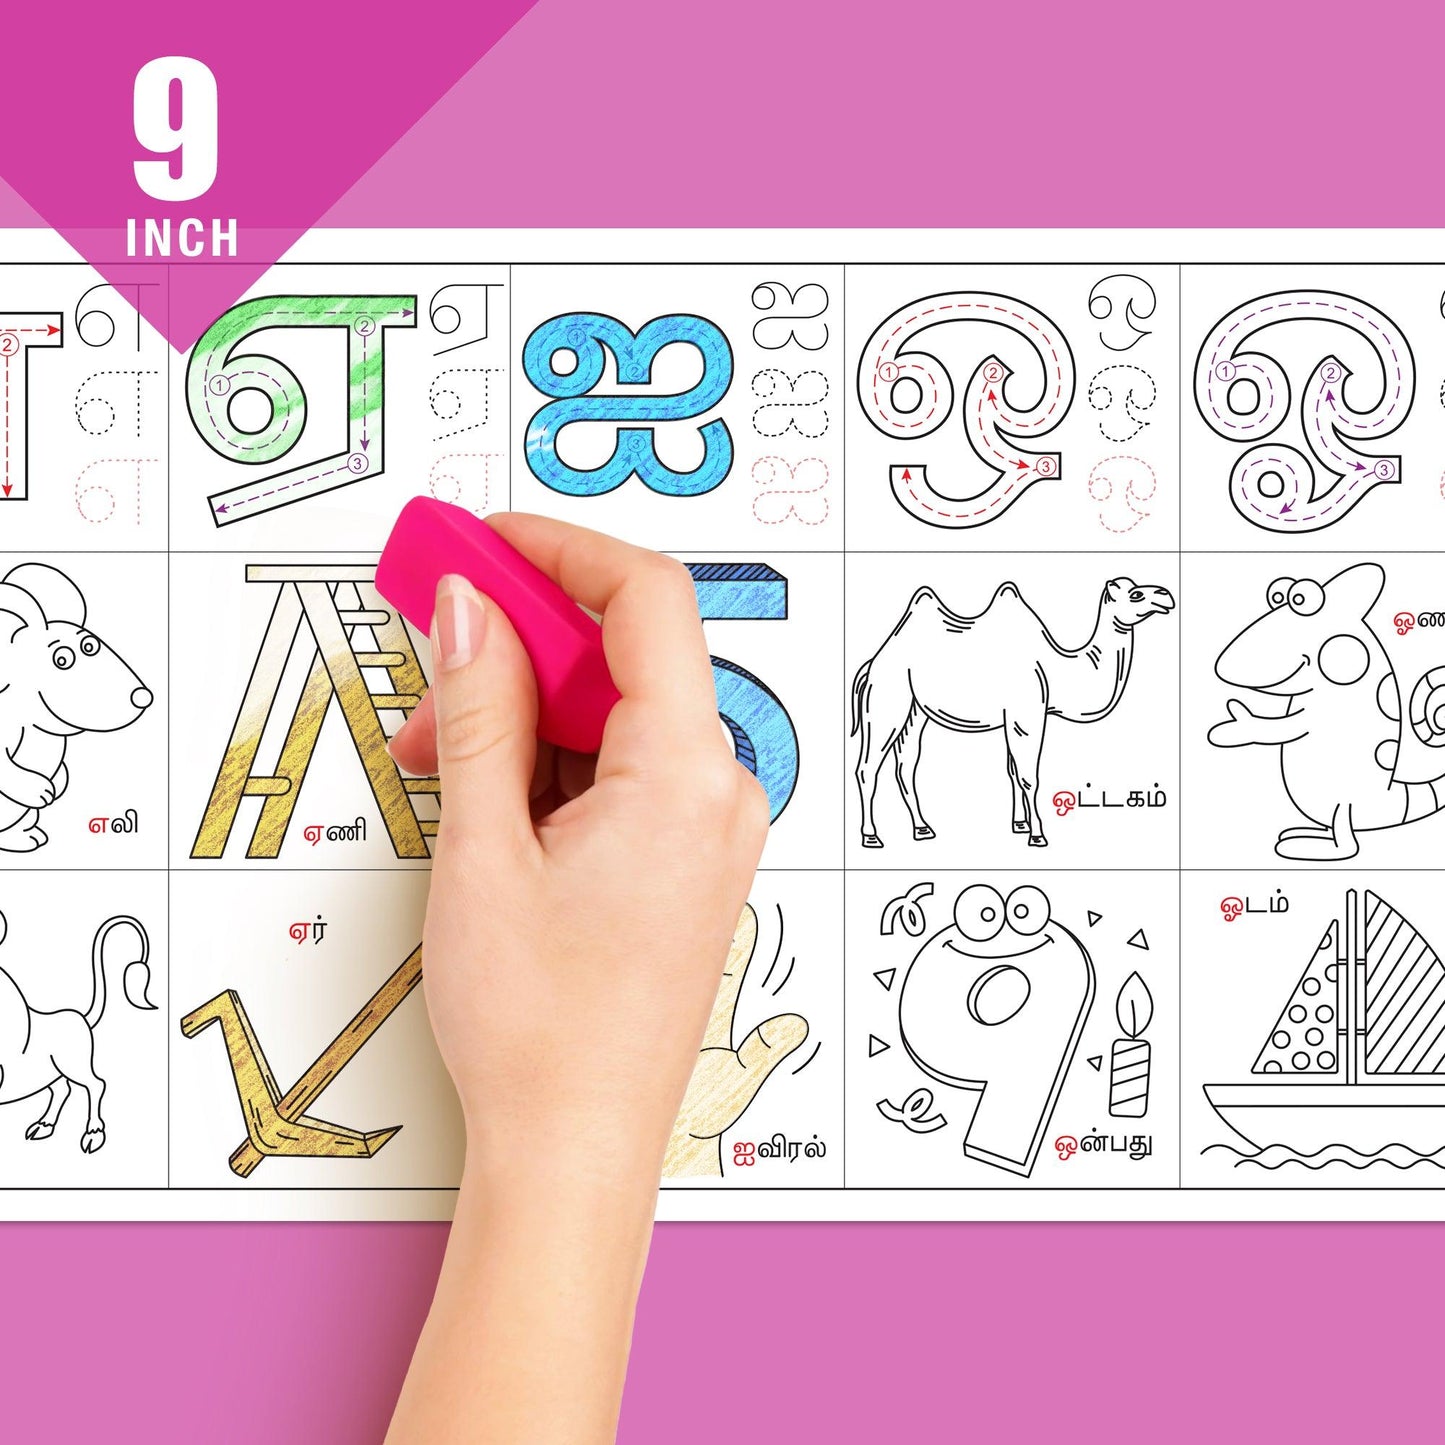 Tamil Alphabet Colouring Roll (9 Inch)